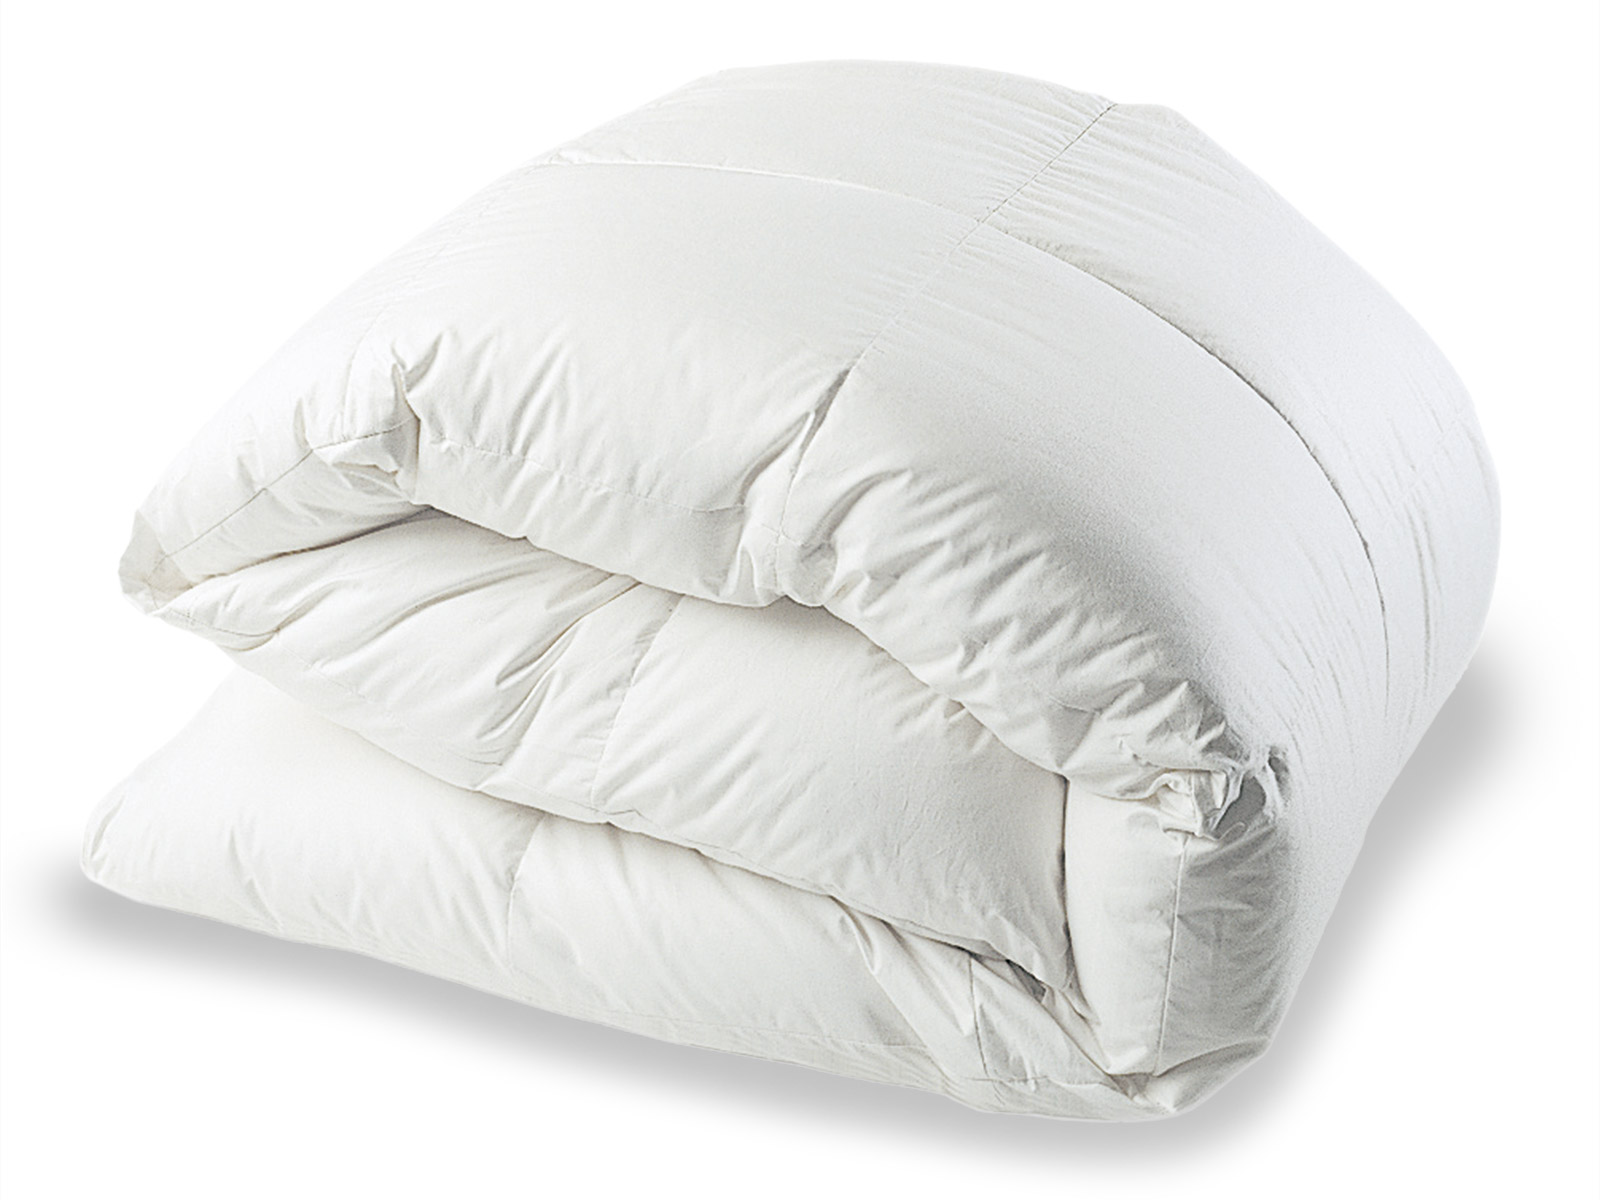 Comforter Fill Options, What Is The Best Filling To Have In A Duvet